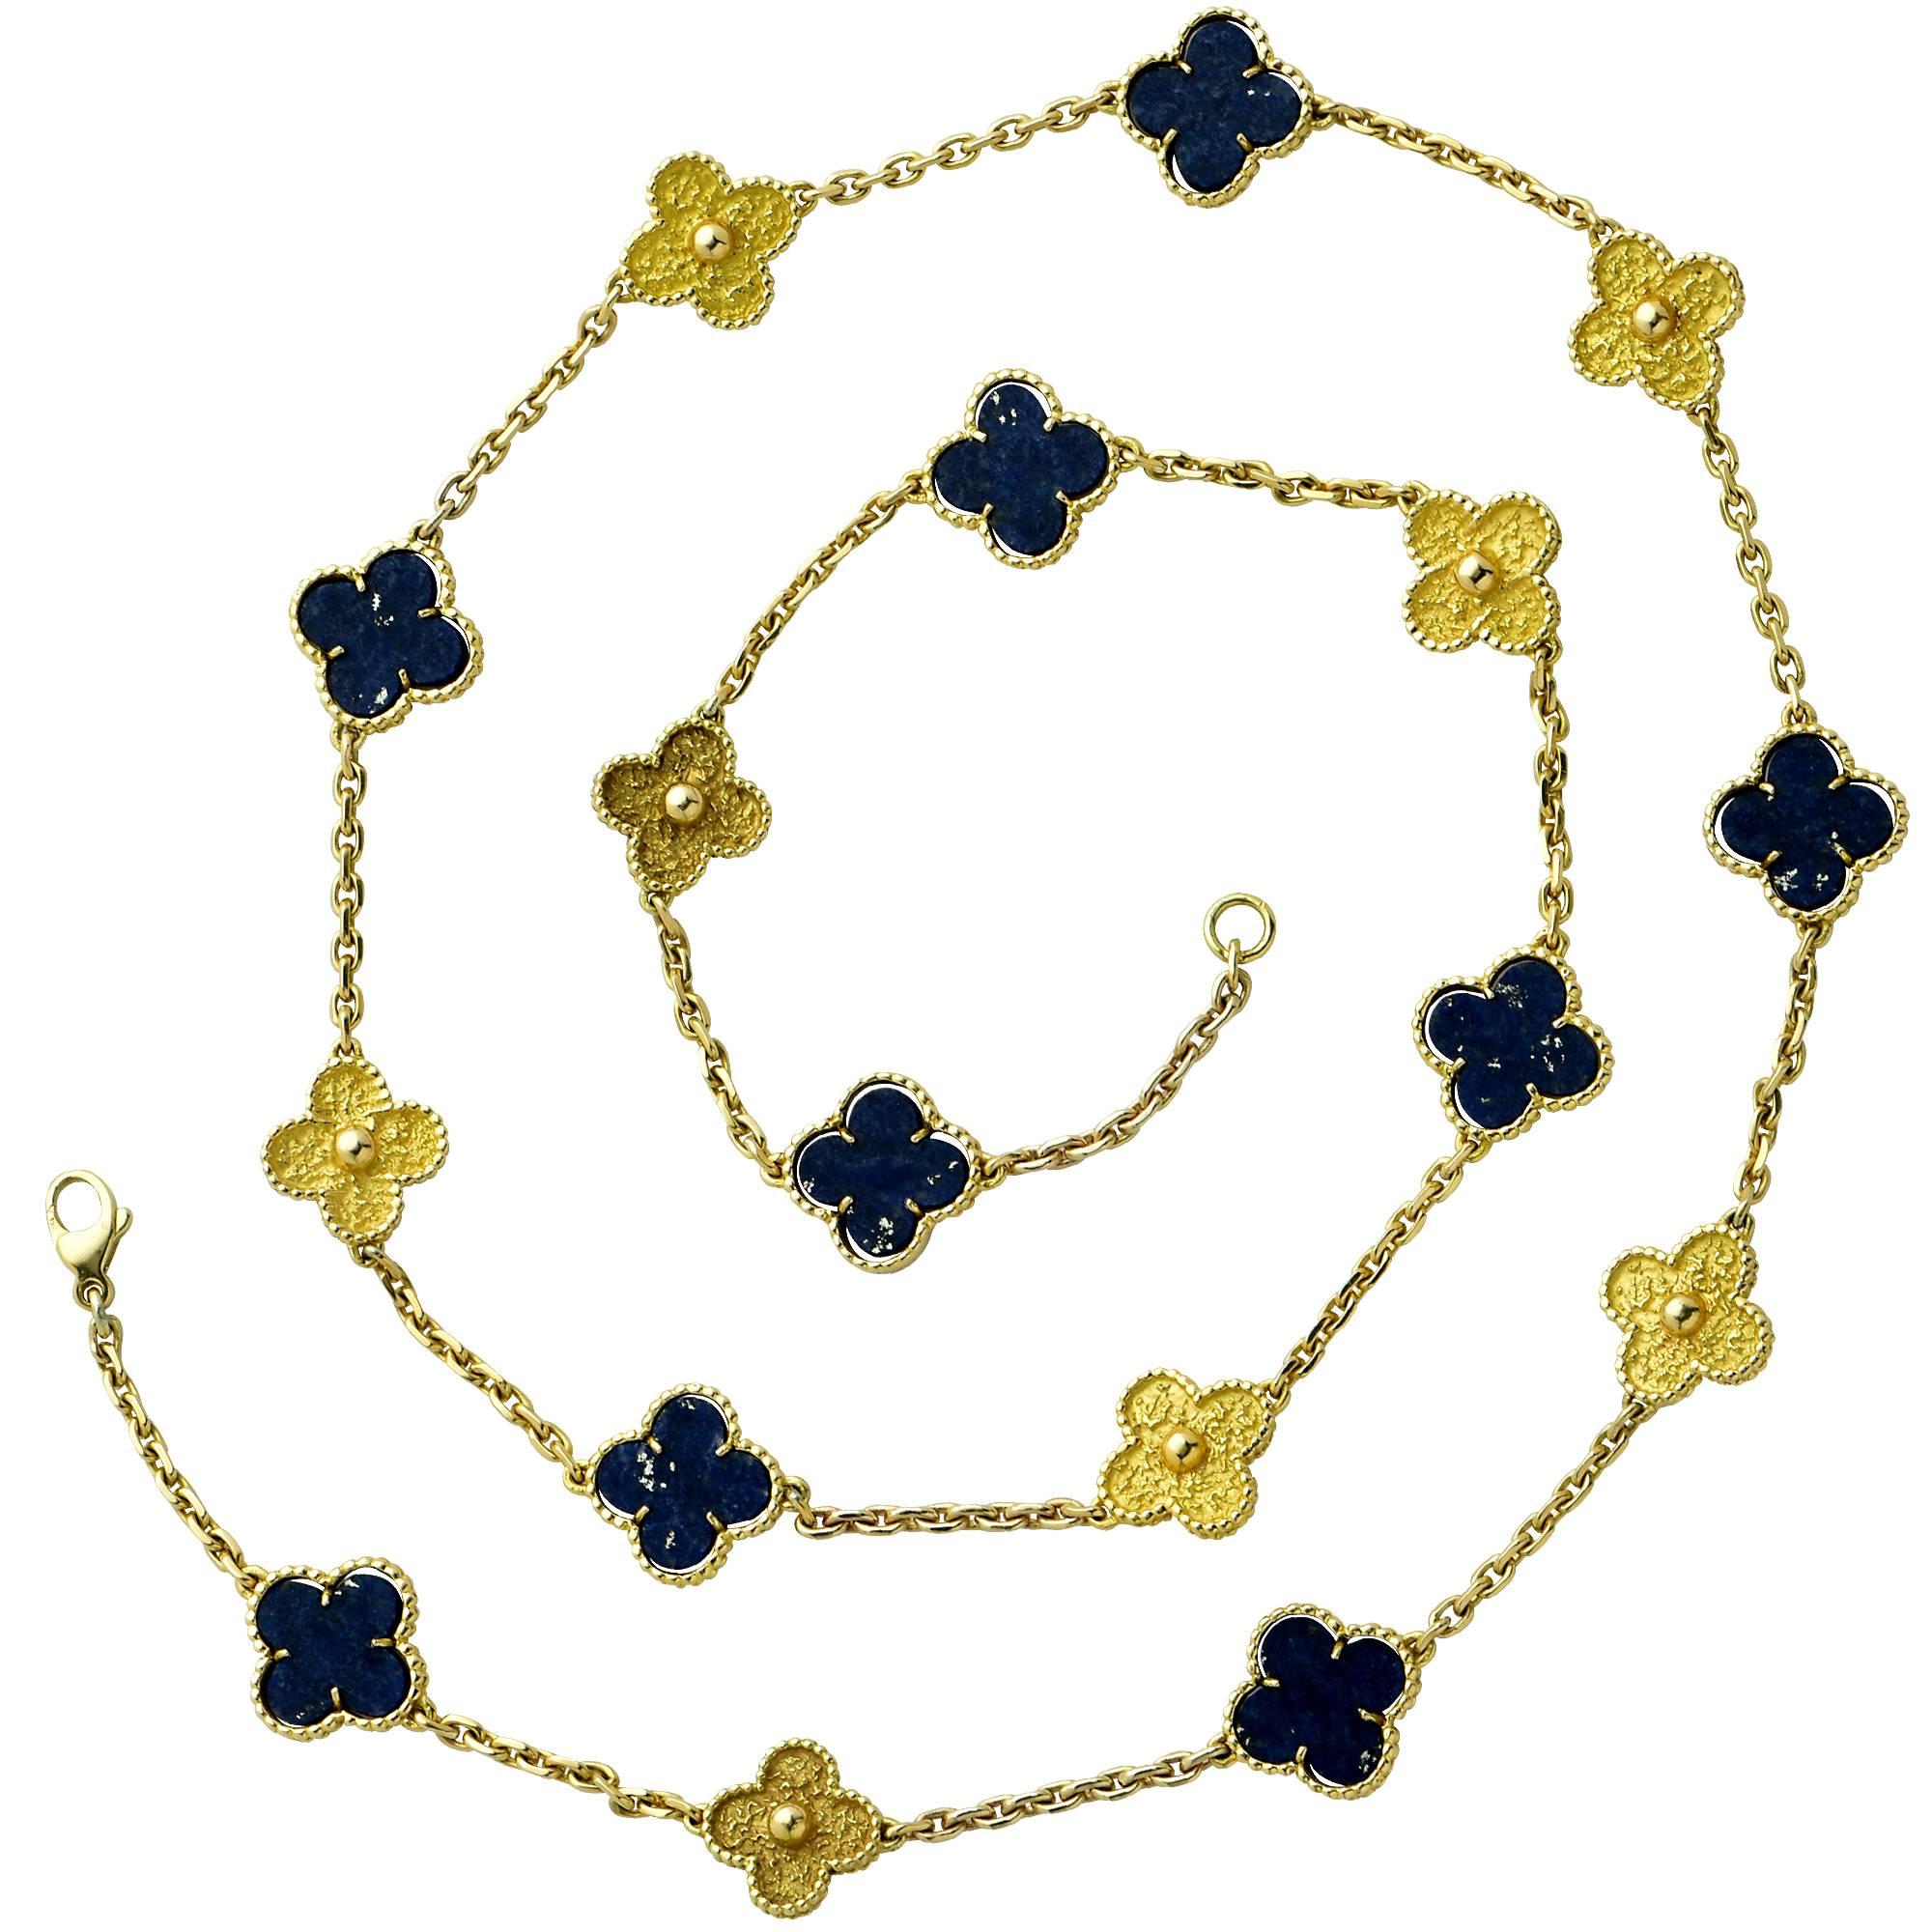 Van Cleef & Arpels Alhambra 17 Motif Lapis and Yellow Gold Necklace